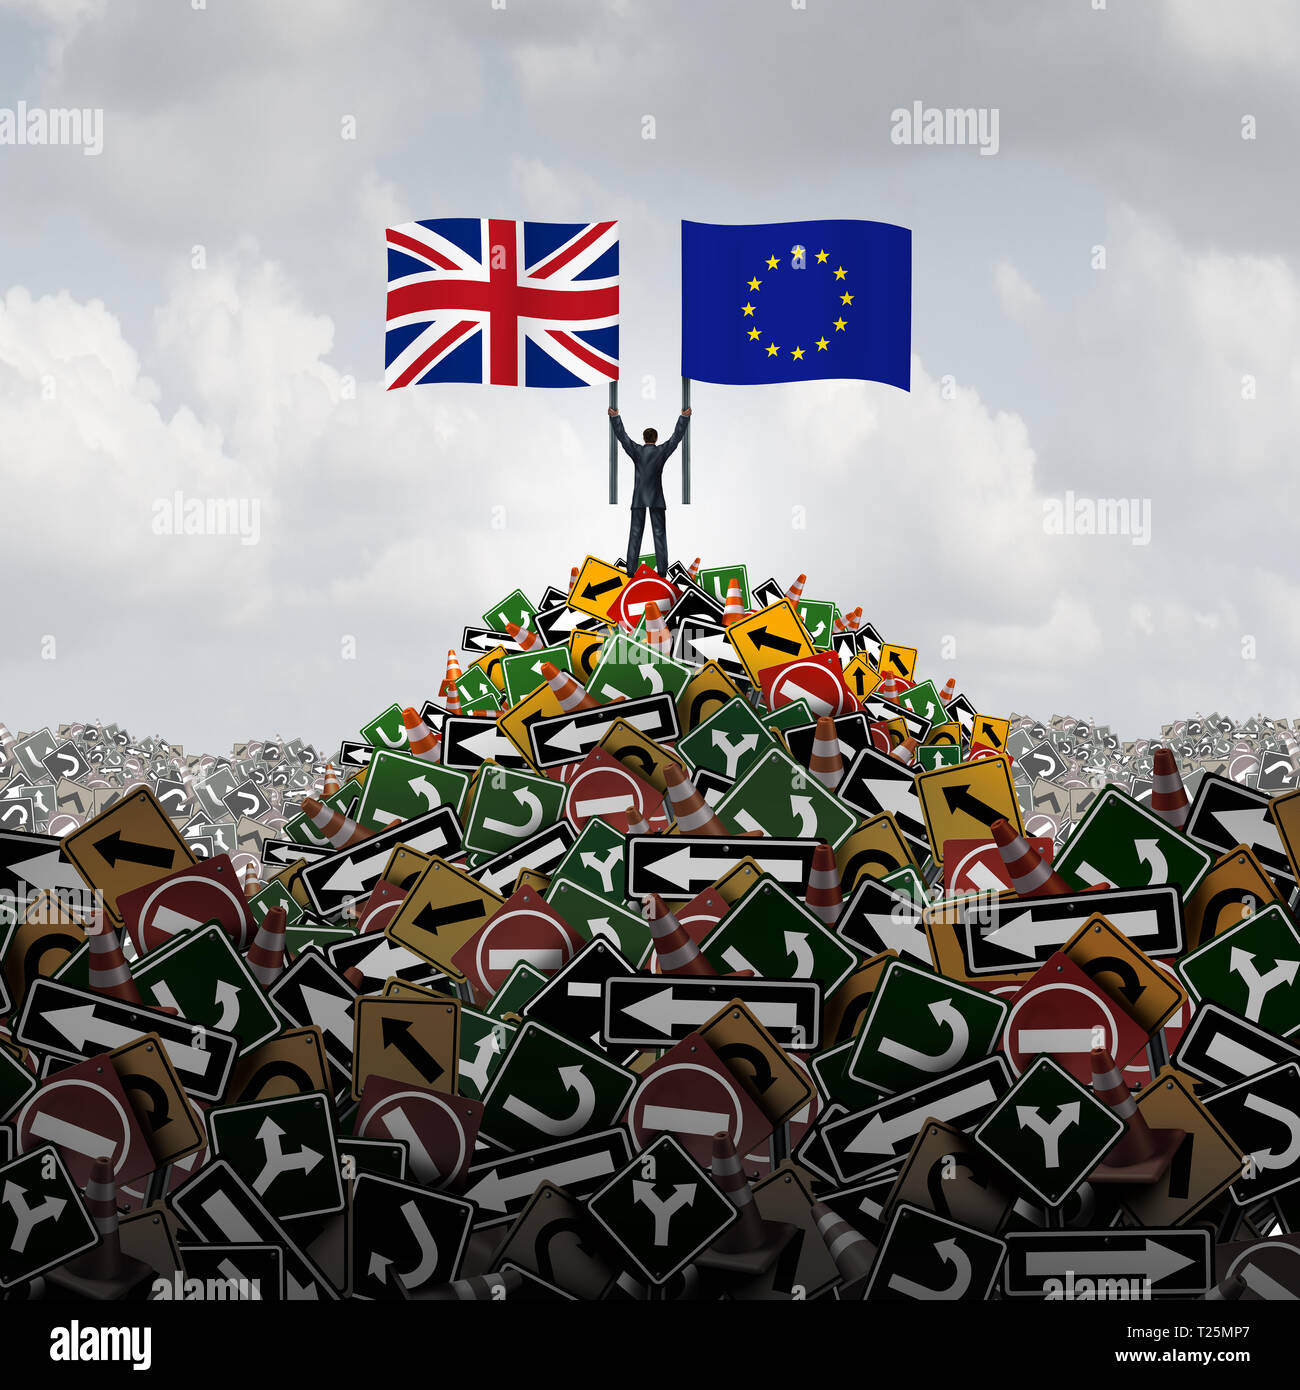 UK European Union decision or Britain Europe political confusion as a brexit concept for a new Britain vote and British government crisis. Stock Photo